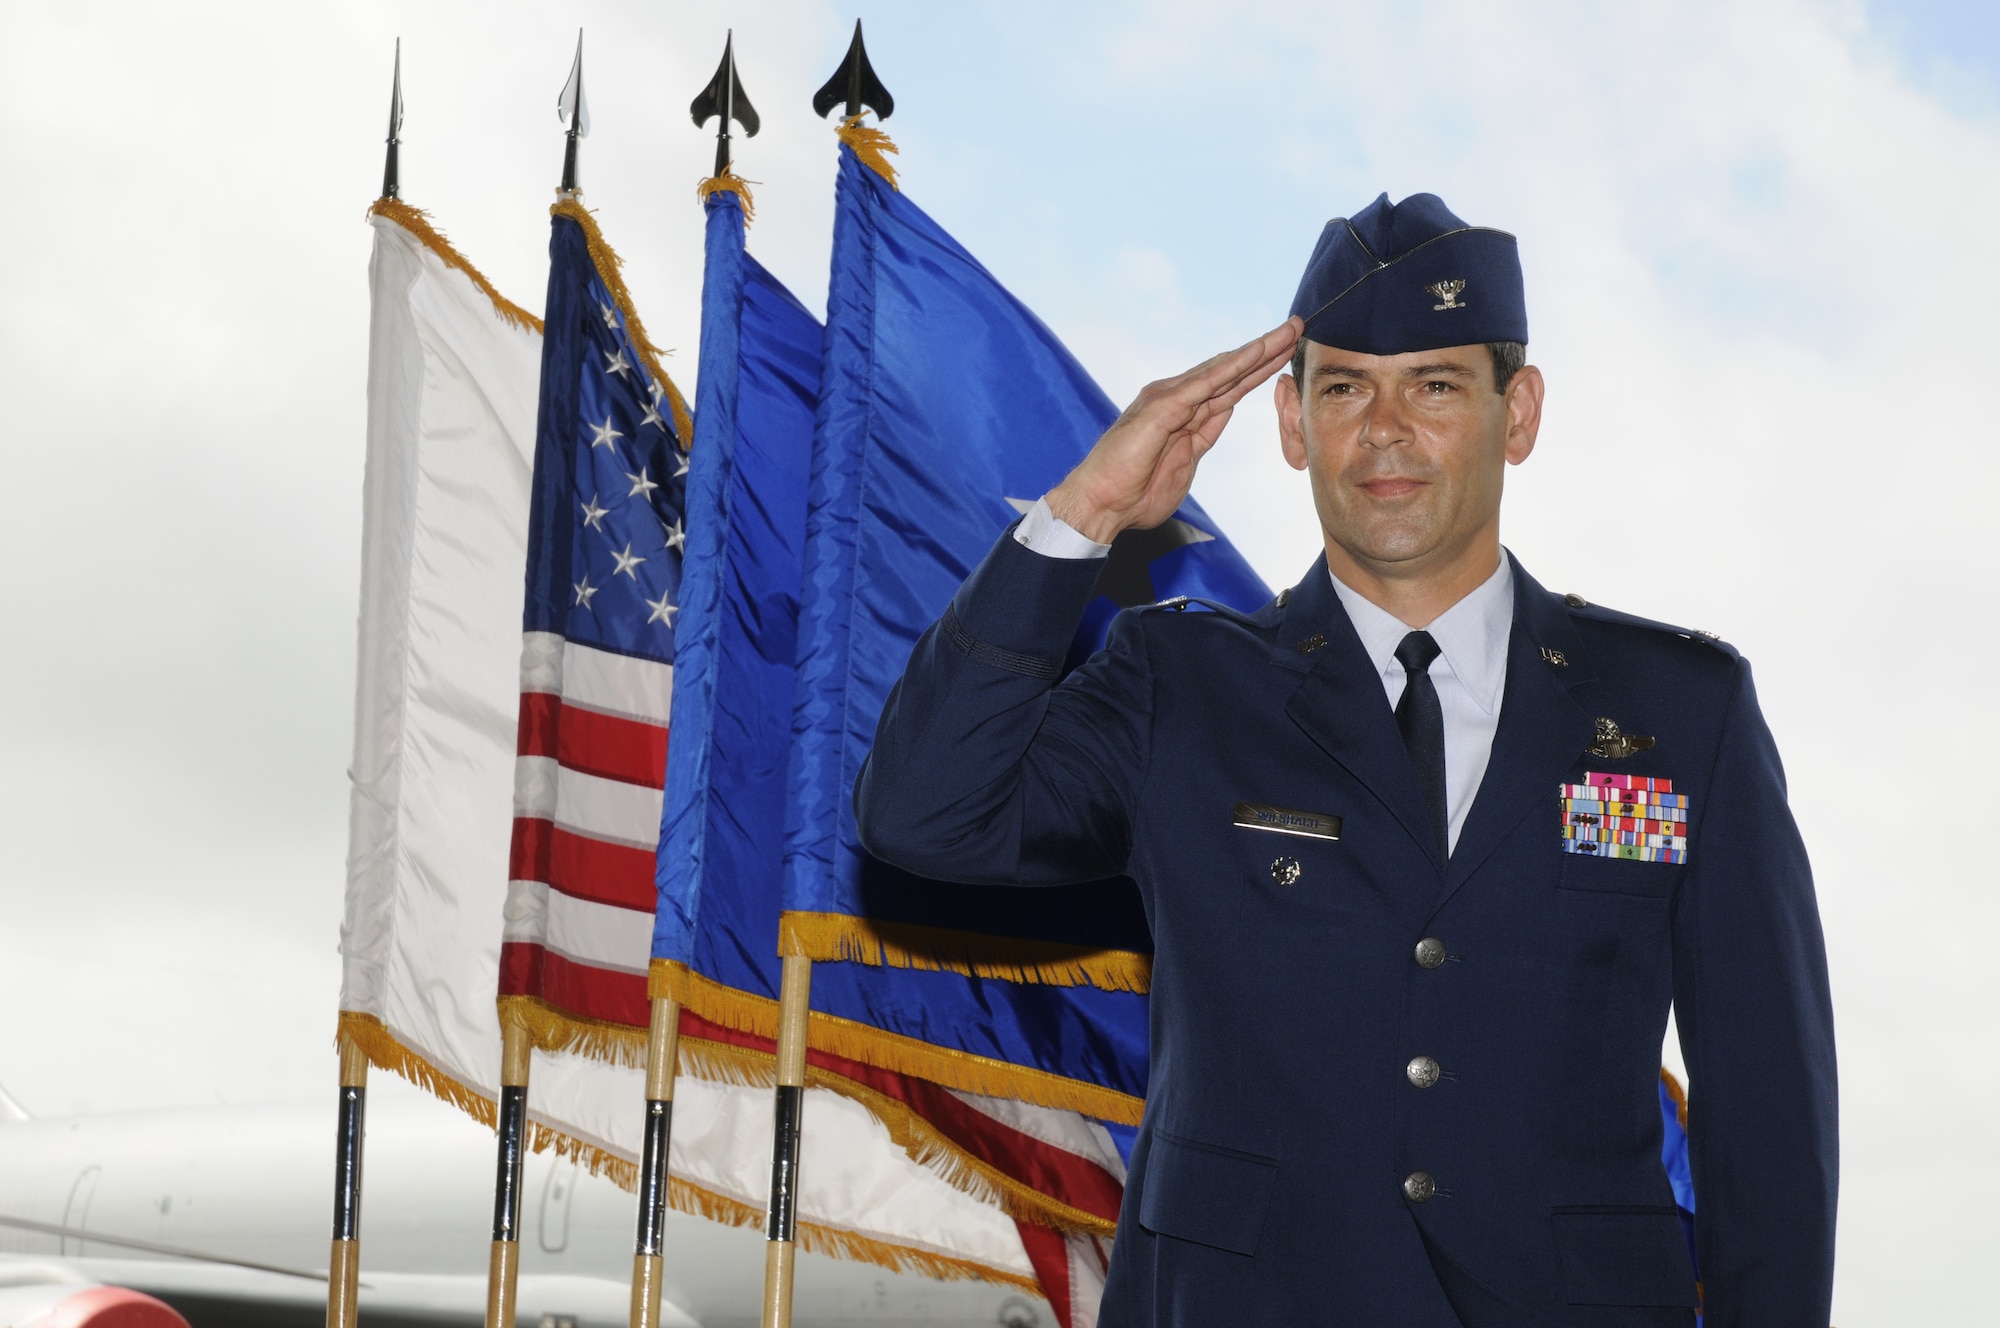 Col. Kenneth S. Wilsbach salutes to the Airmen of the 18th Wing as he assumes command of the wing during a change of command July 9 at Kadena Air Base, Japan. Brig. Gen. Brett Williams relinquished command earlier during the ceremony.
(U.S. Air Force photo/Airman 1st Class Chad Warren)            